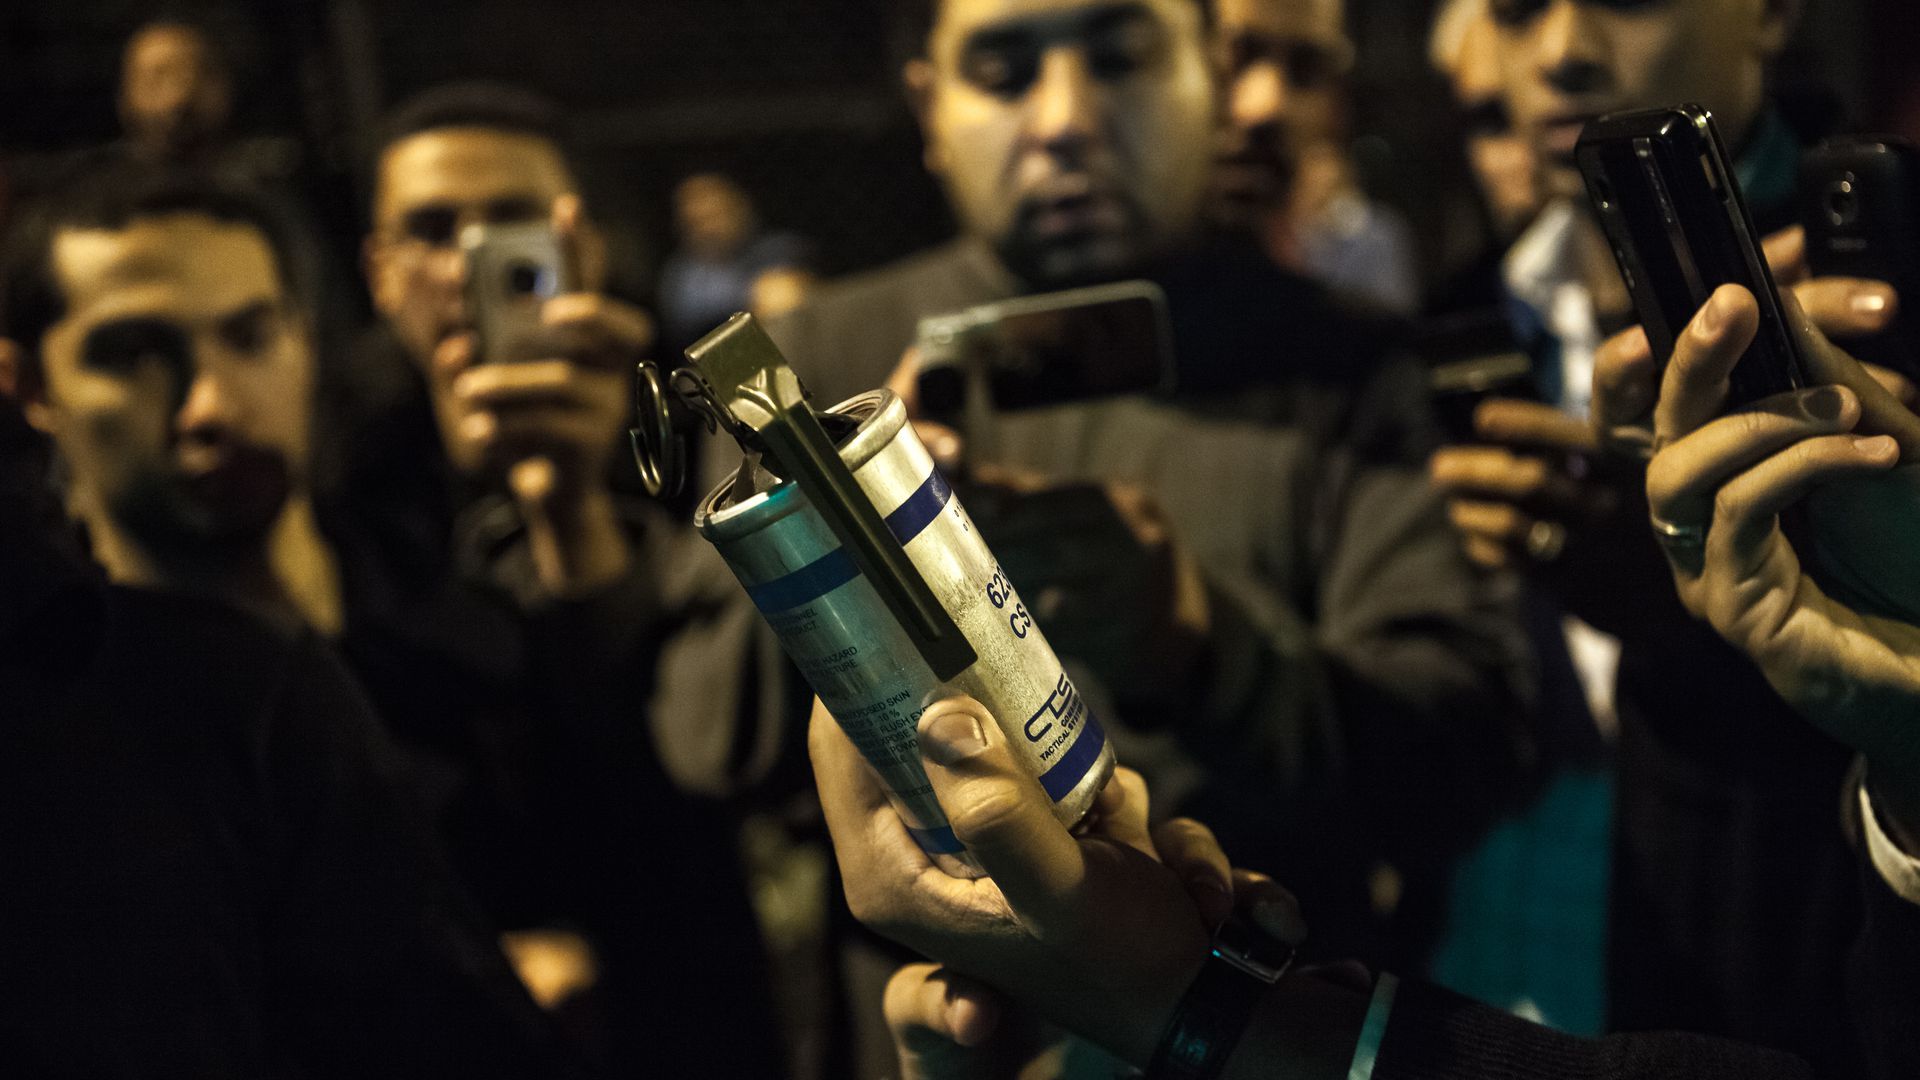 Protestor holding up a canister of tear gas